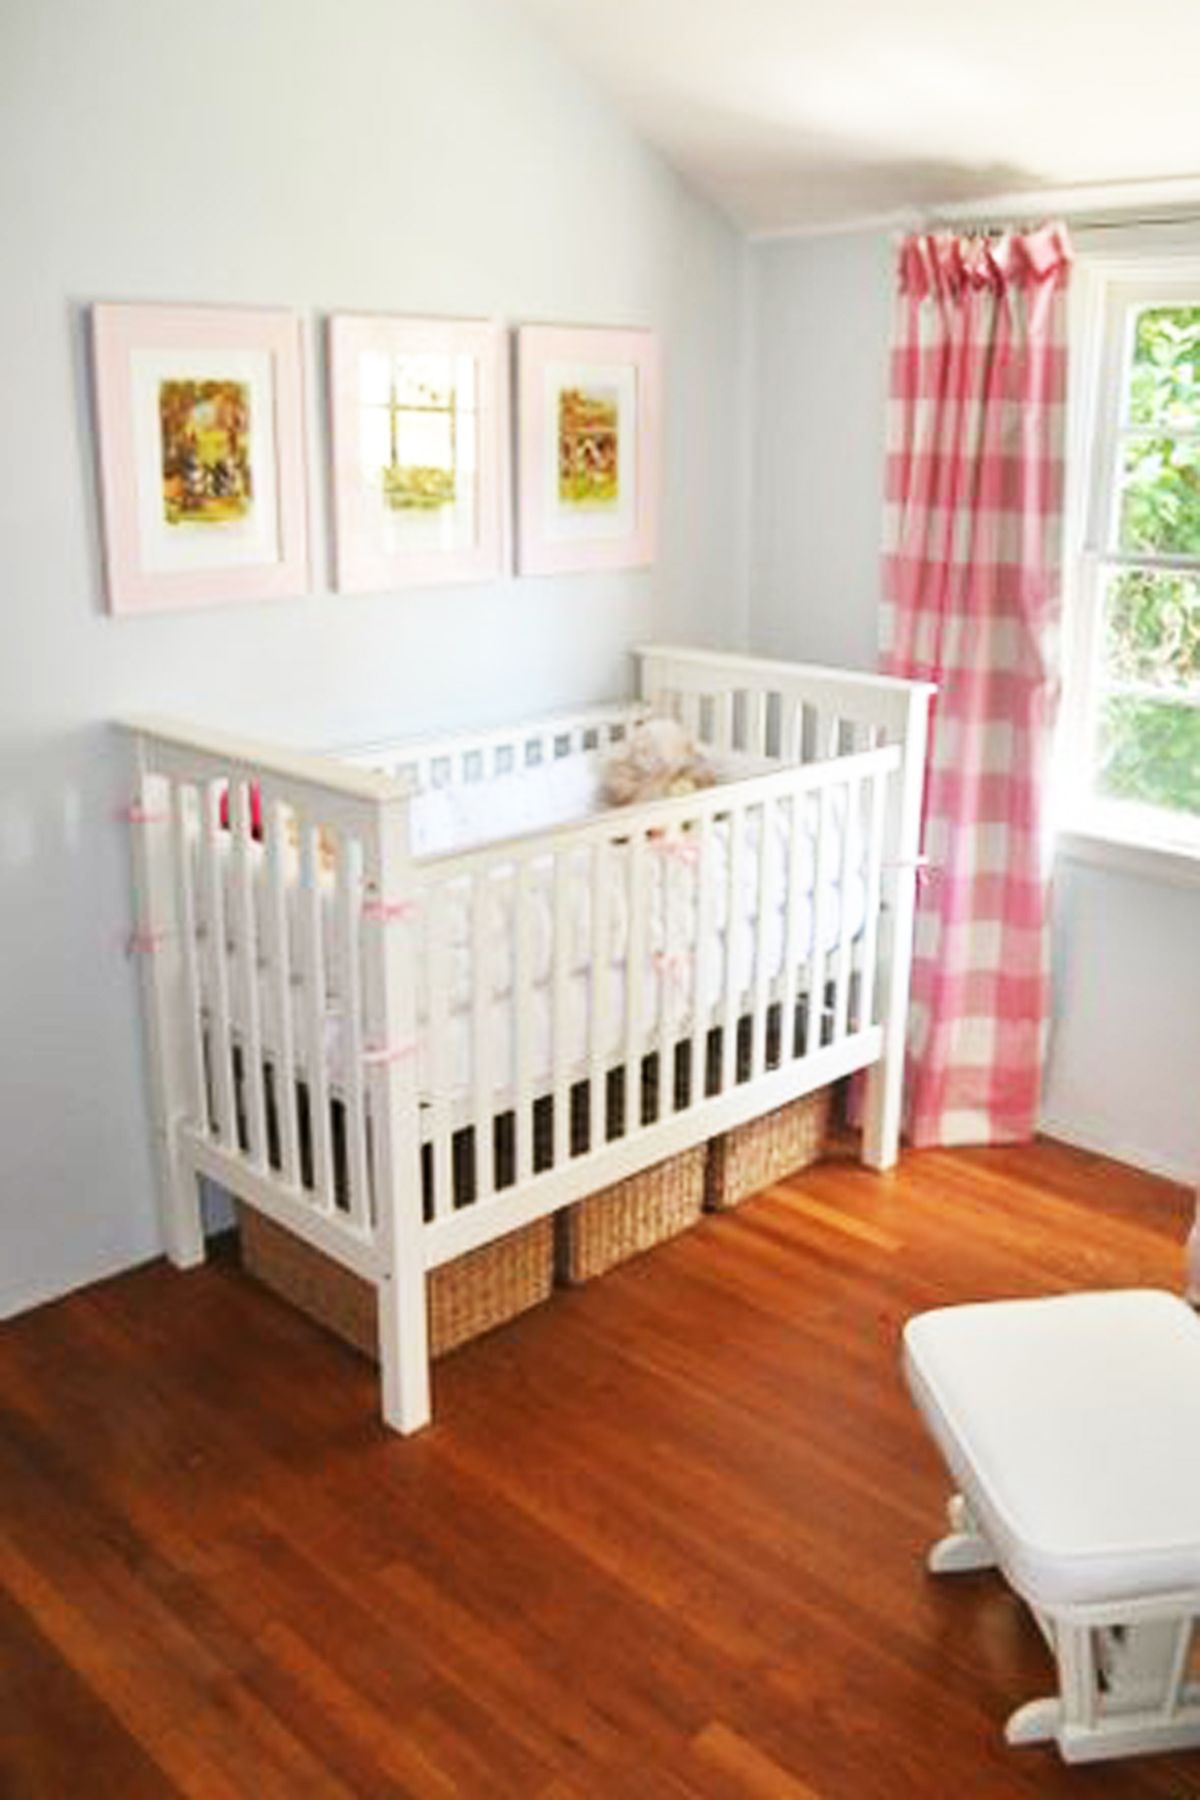 Use the space in your offspring’s room perfectly: cribs with storage underneath